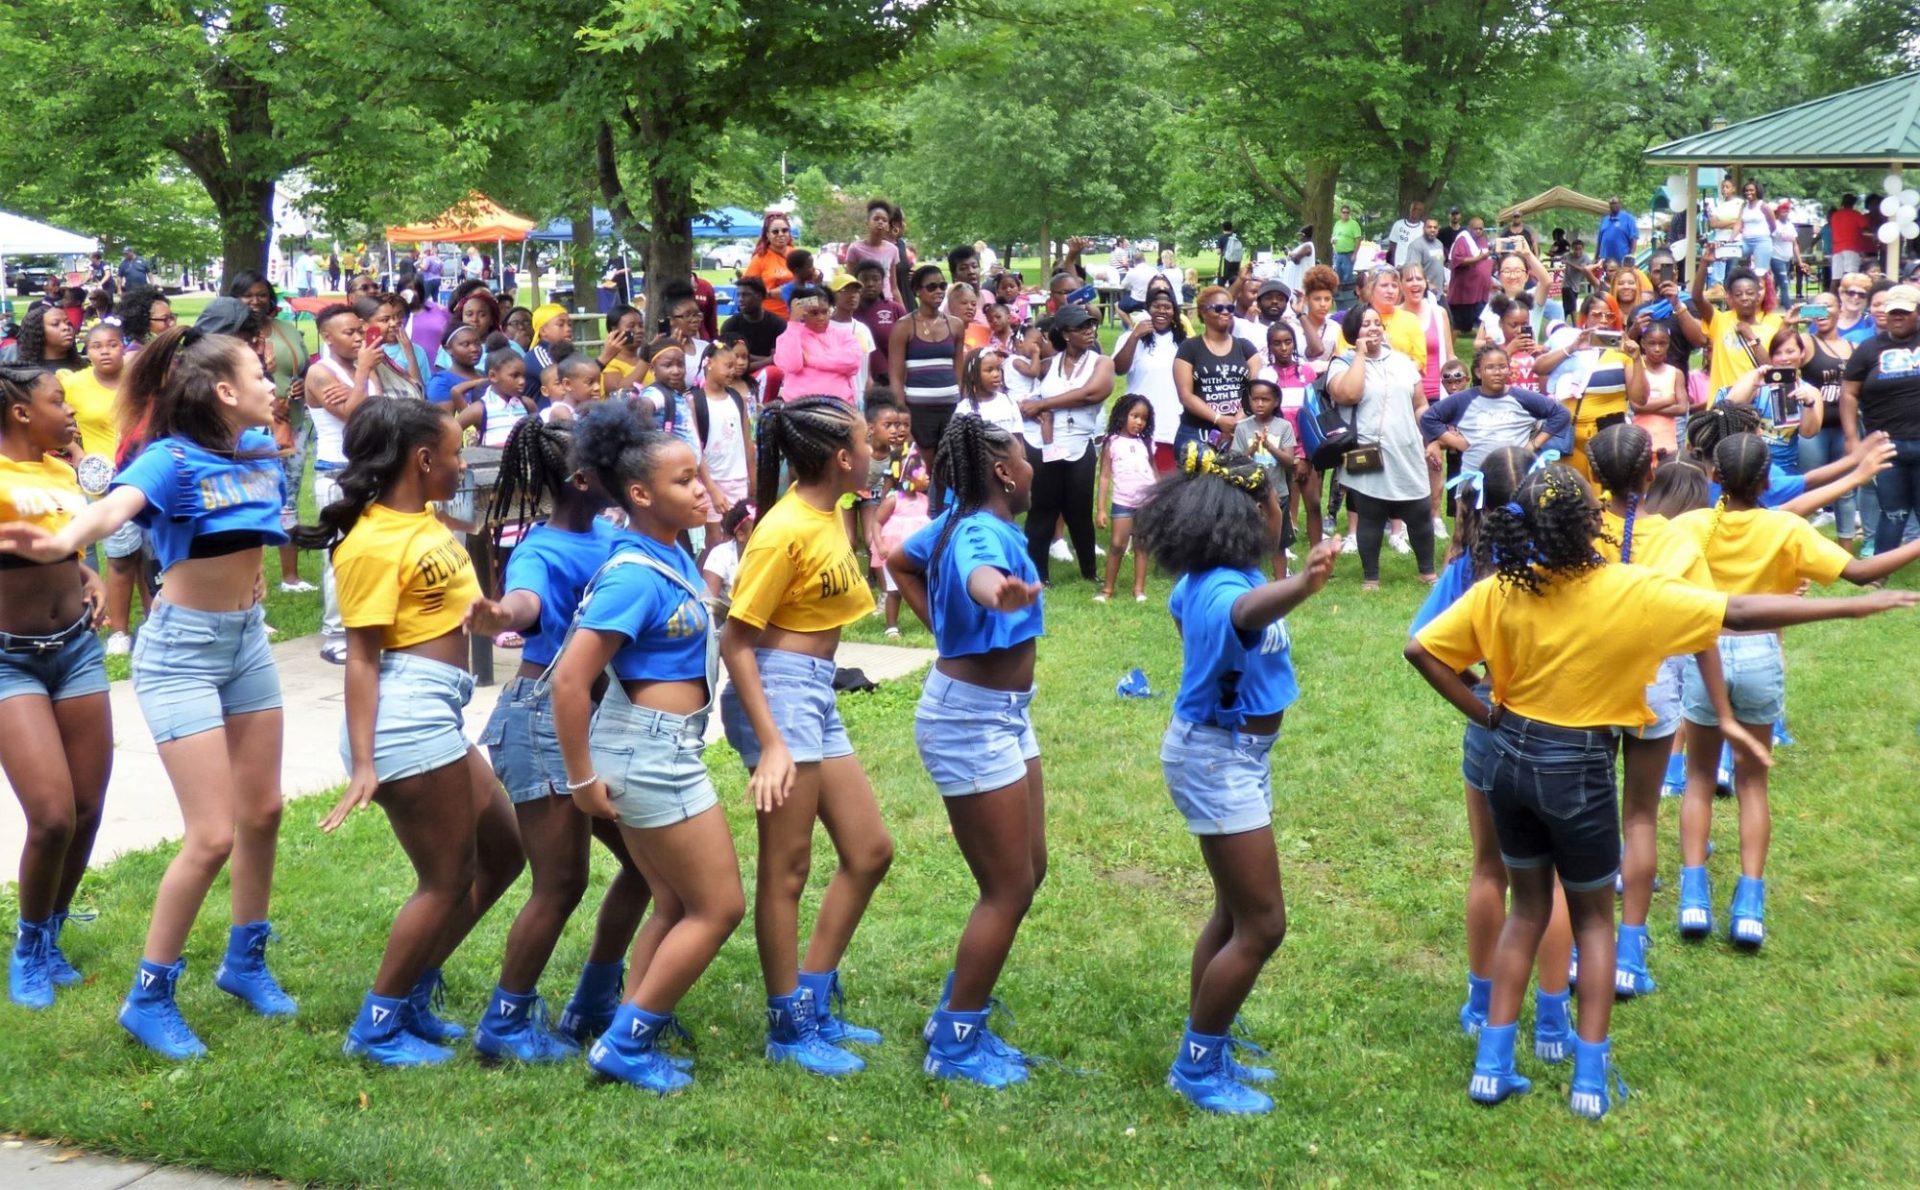 Several young Black girls in blue and yellow t-shirts and matching blue shoes are in a line doing a dance. There is a crowd of people looking on.